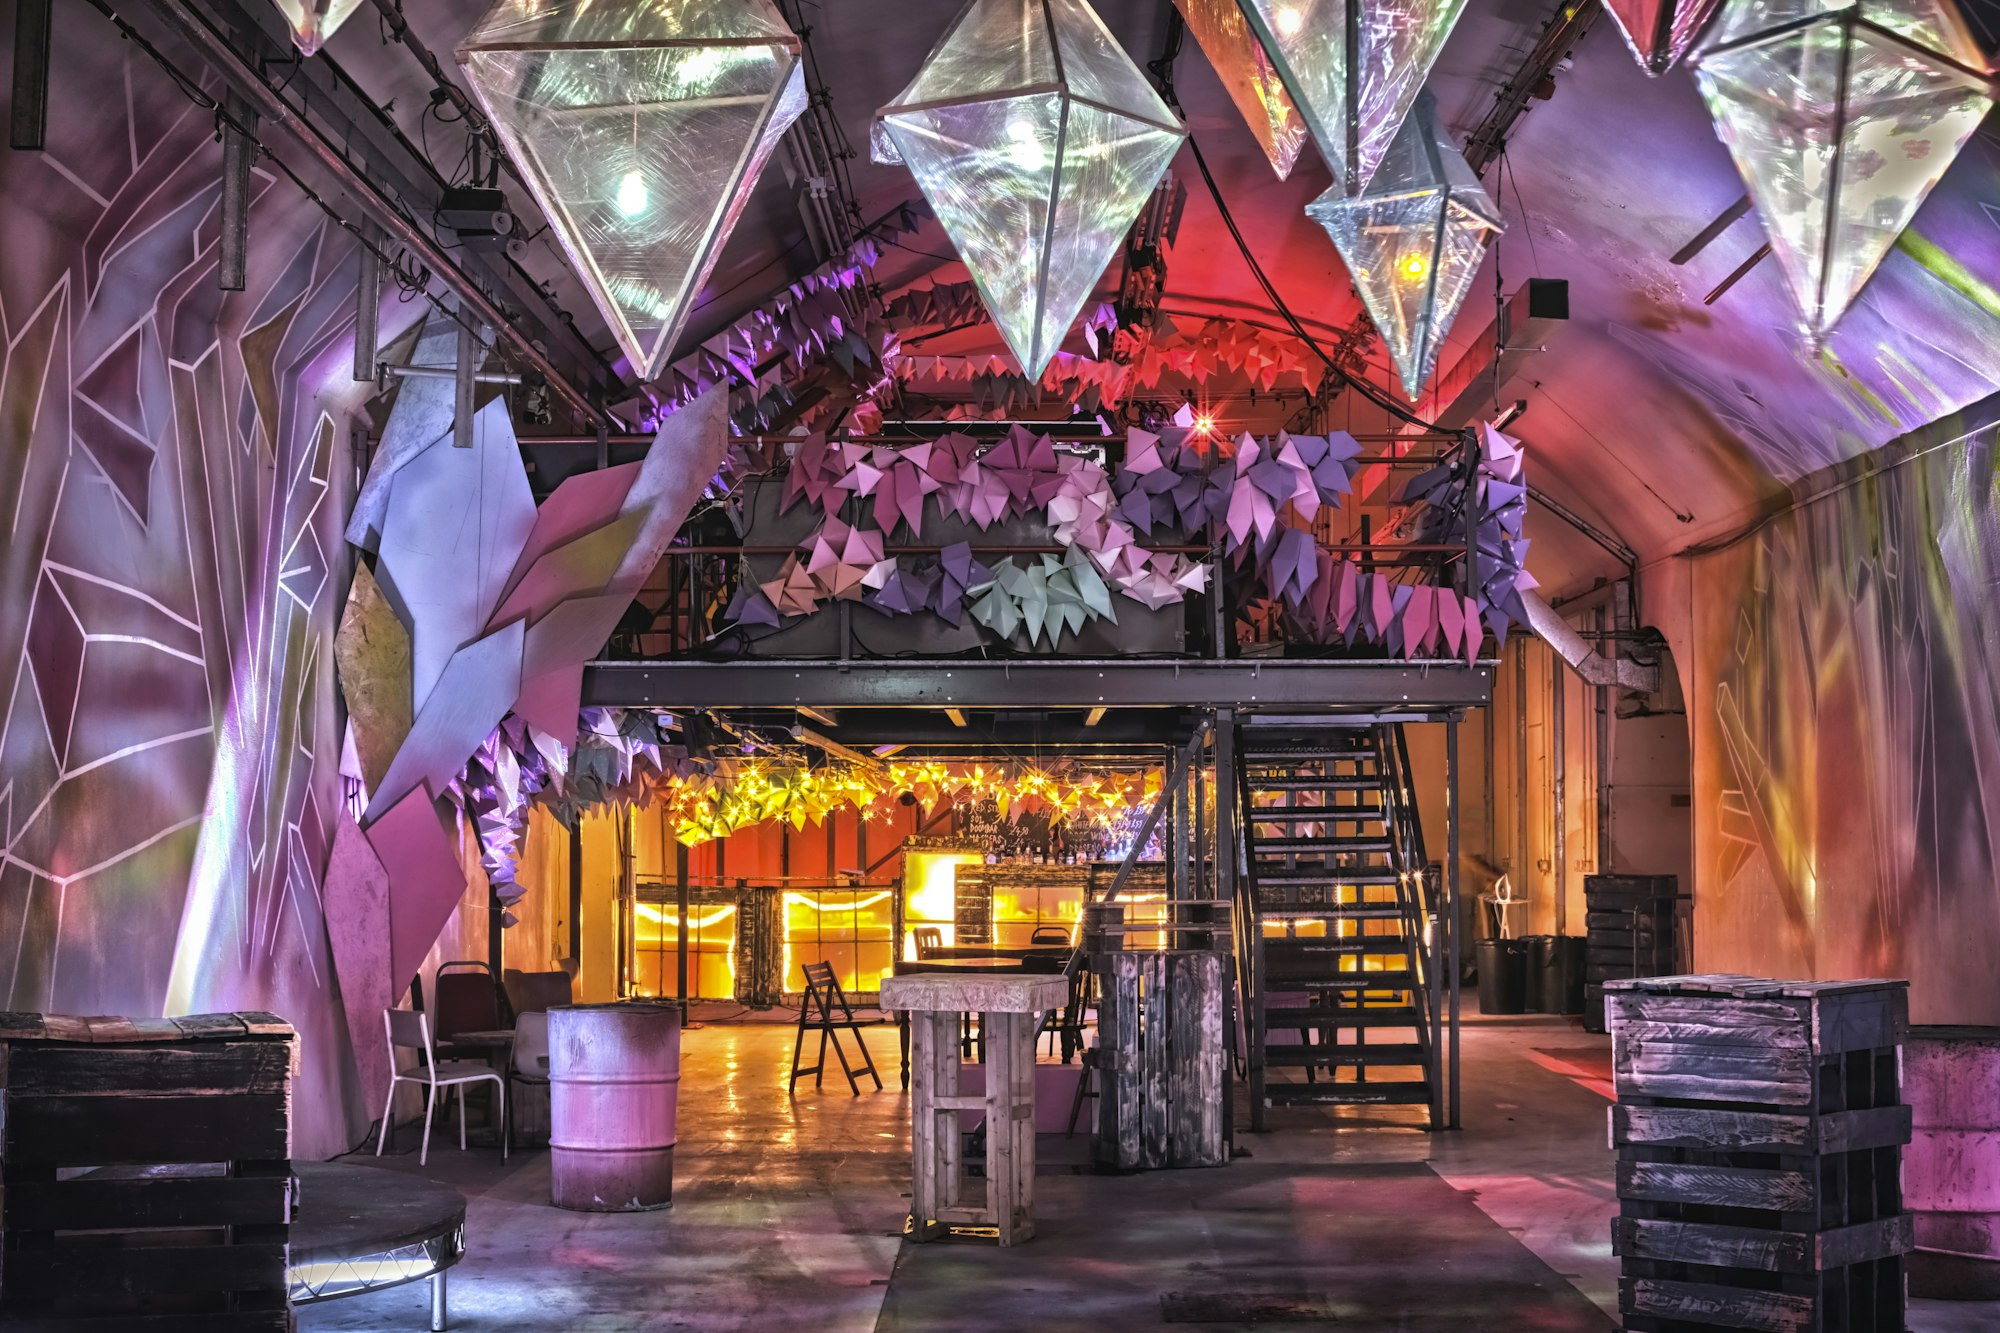 Lilac and pink lighting highlights the industrial styling inside The Vaults in London.